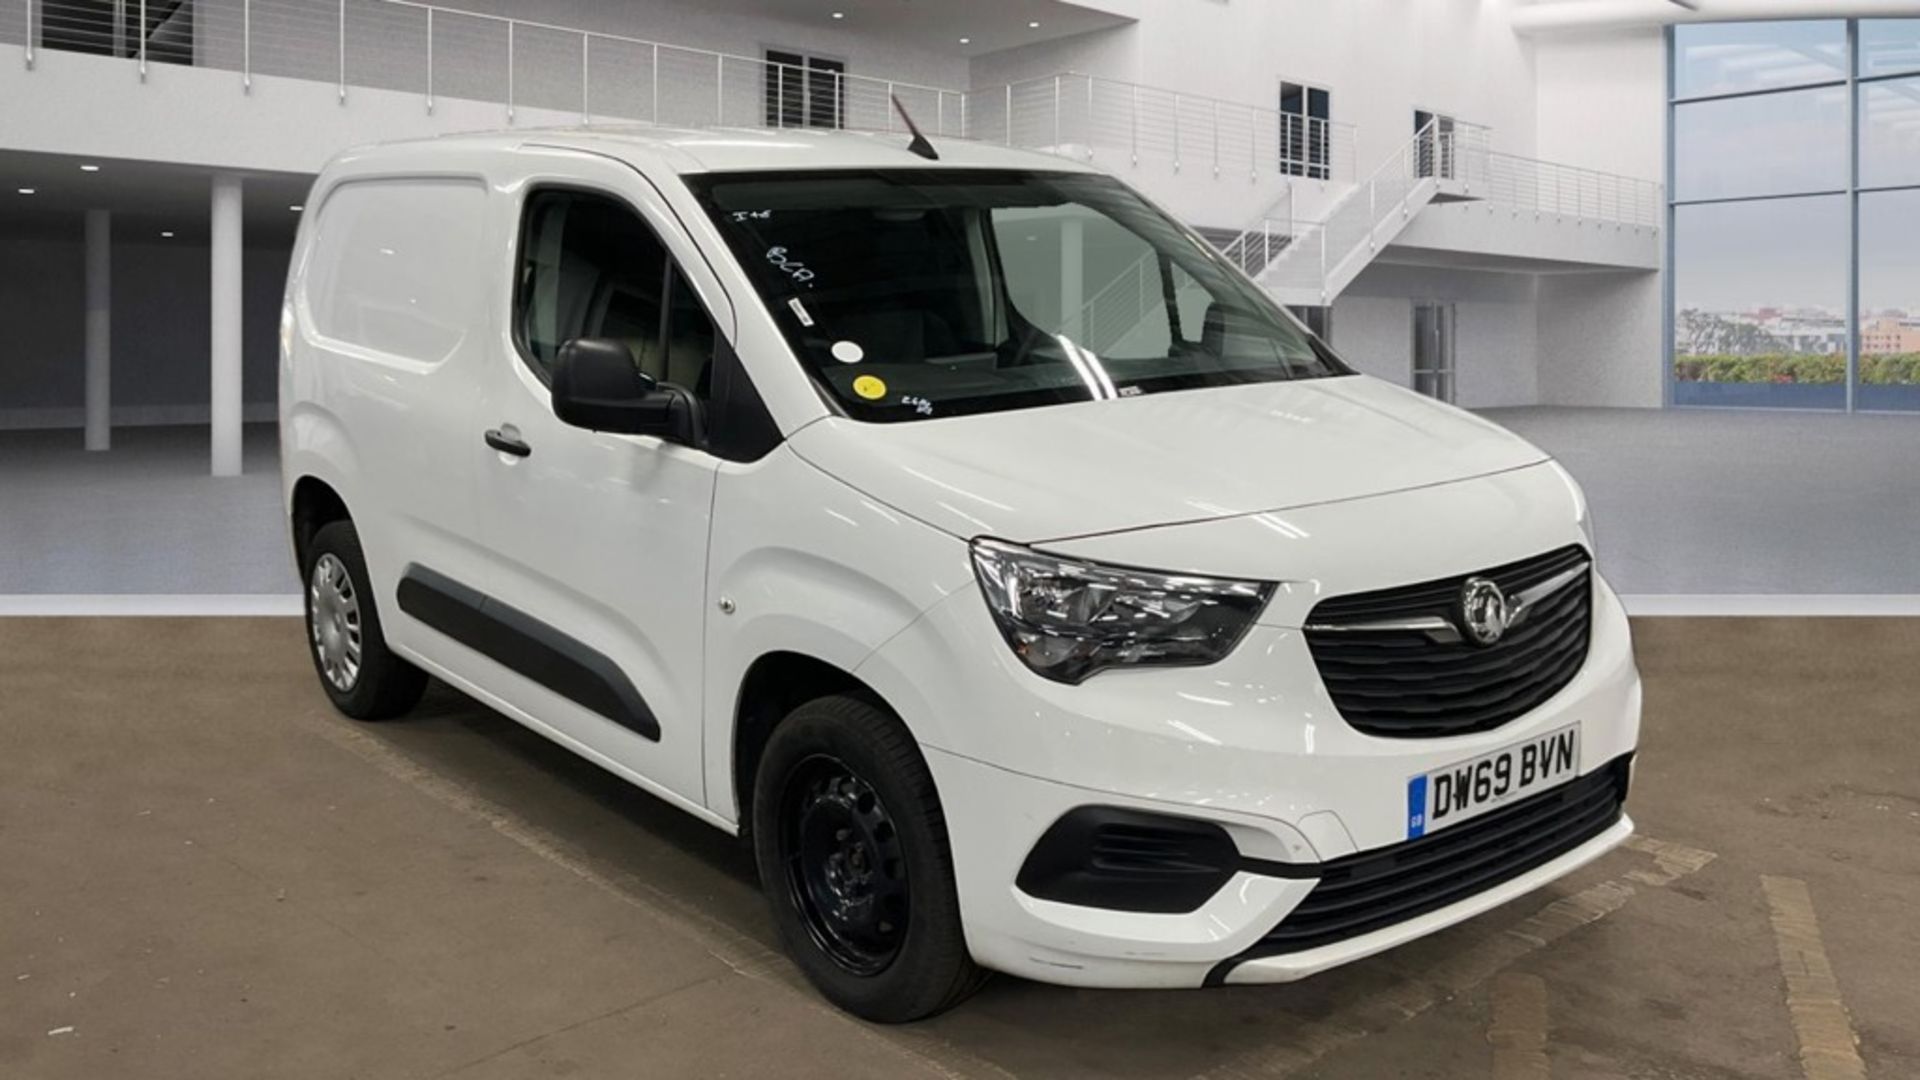 Vauxhall Combo 1.5 Cdti "Sportive" 2020 Reg - 1 Owner - Air Con , Mileage Is Only 79k Miles With FSH